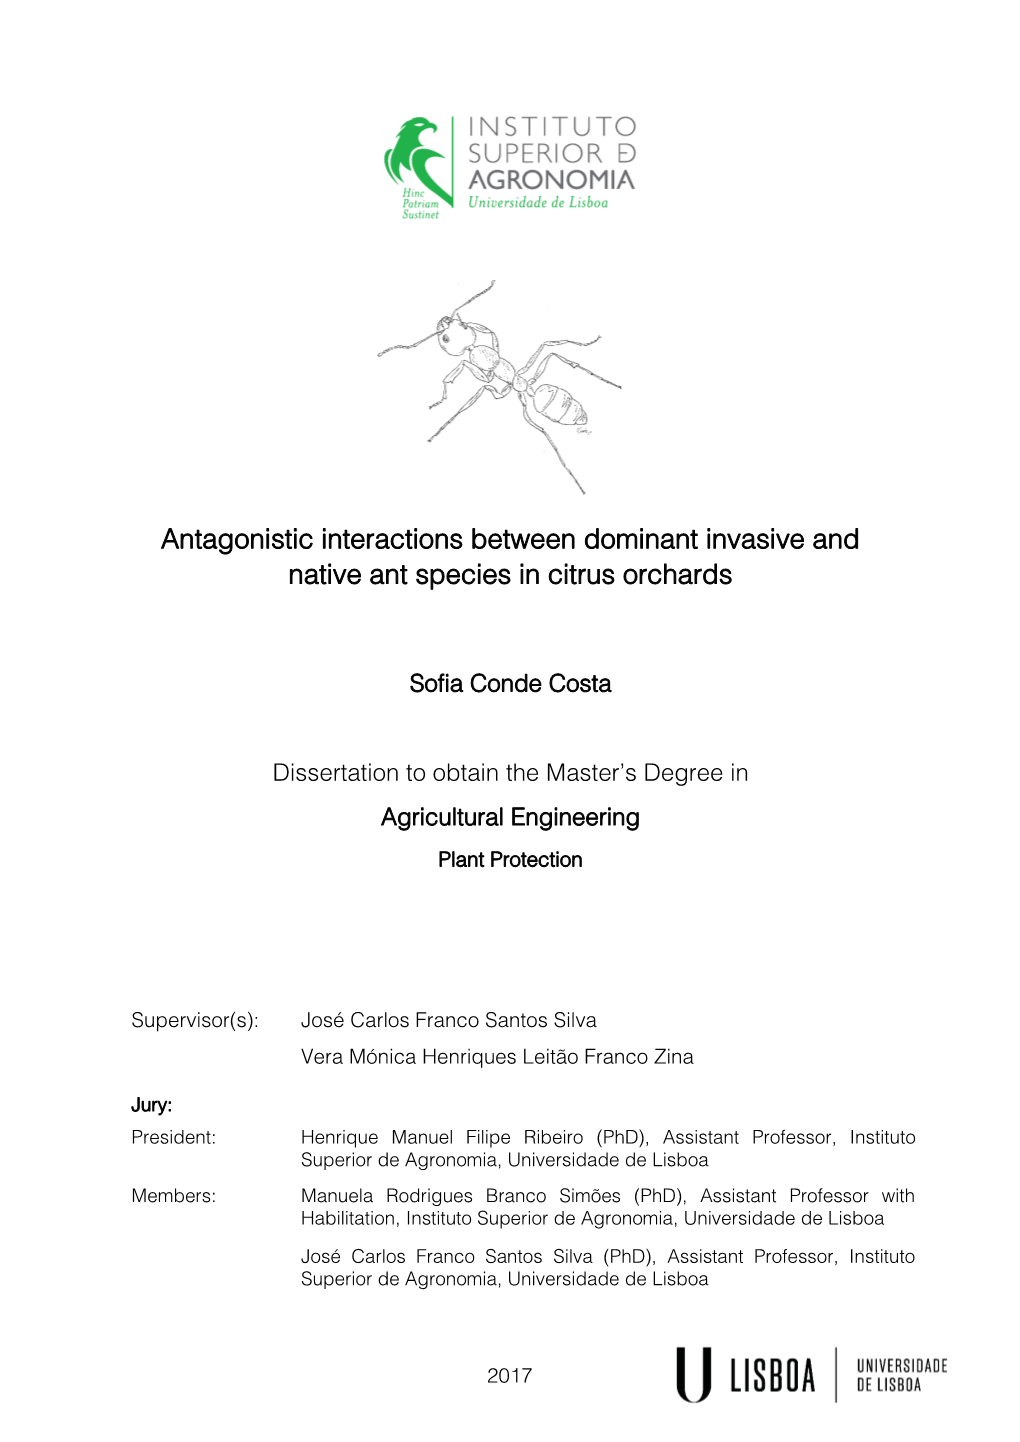 Antagonistic Interactions Between Dominant Invasive and Native Ant Species in Citrus Orchards